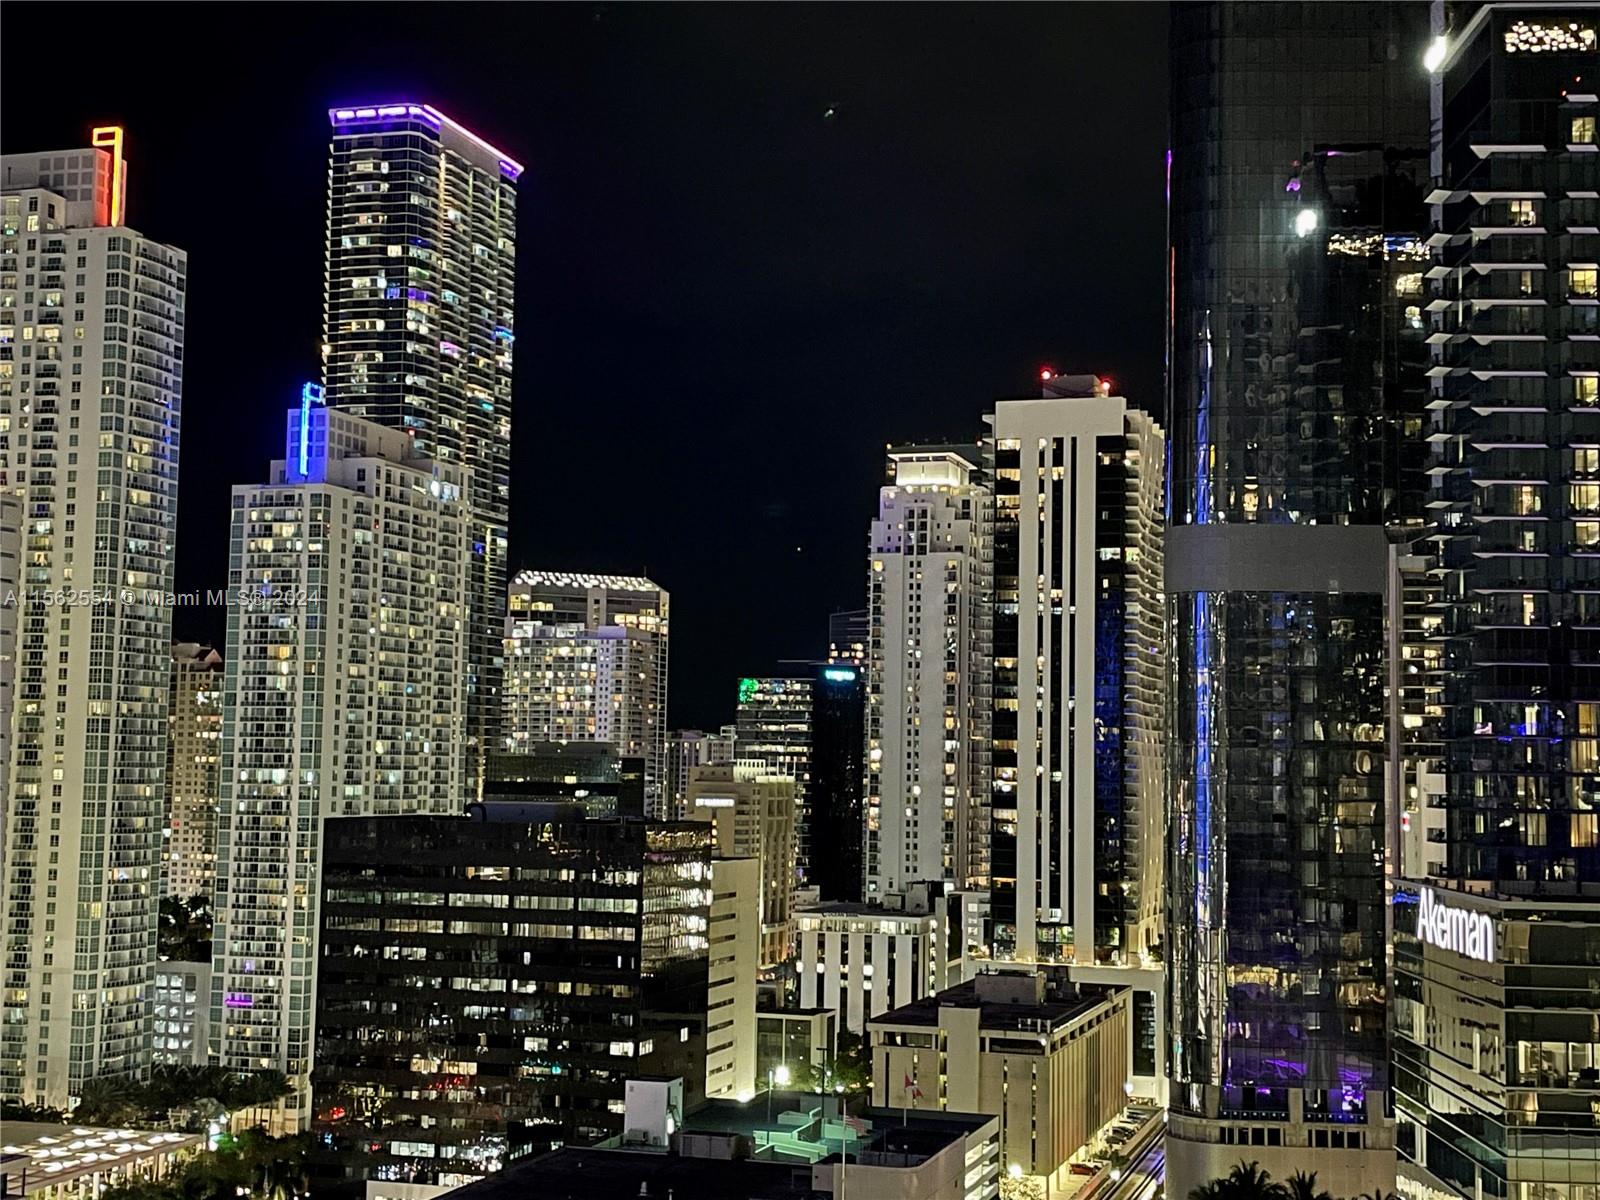 Charming penthouse studio with fantastic city views! Completely and tastefully updated and furnished. 24-hour security, rooftop pool, gazebo and fitness center. Washer and drier in unit. Across from Brickell City Center and close to restaurants, shops  and nightlife in the trendy Brickell area.